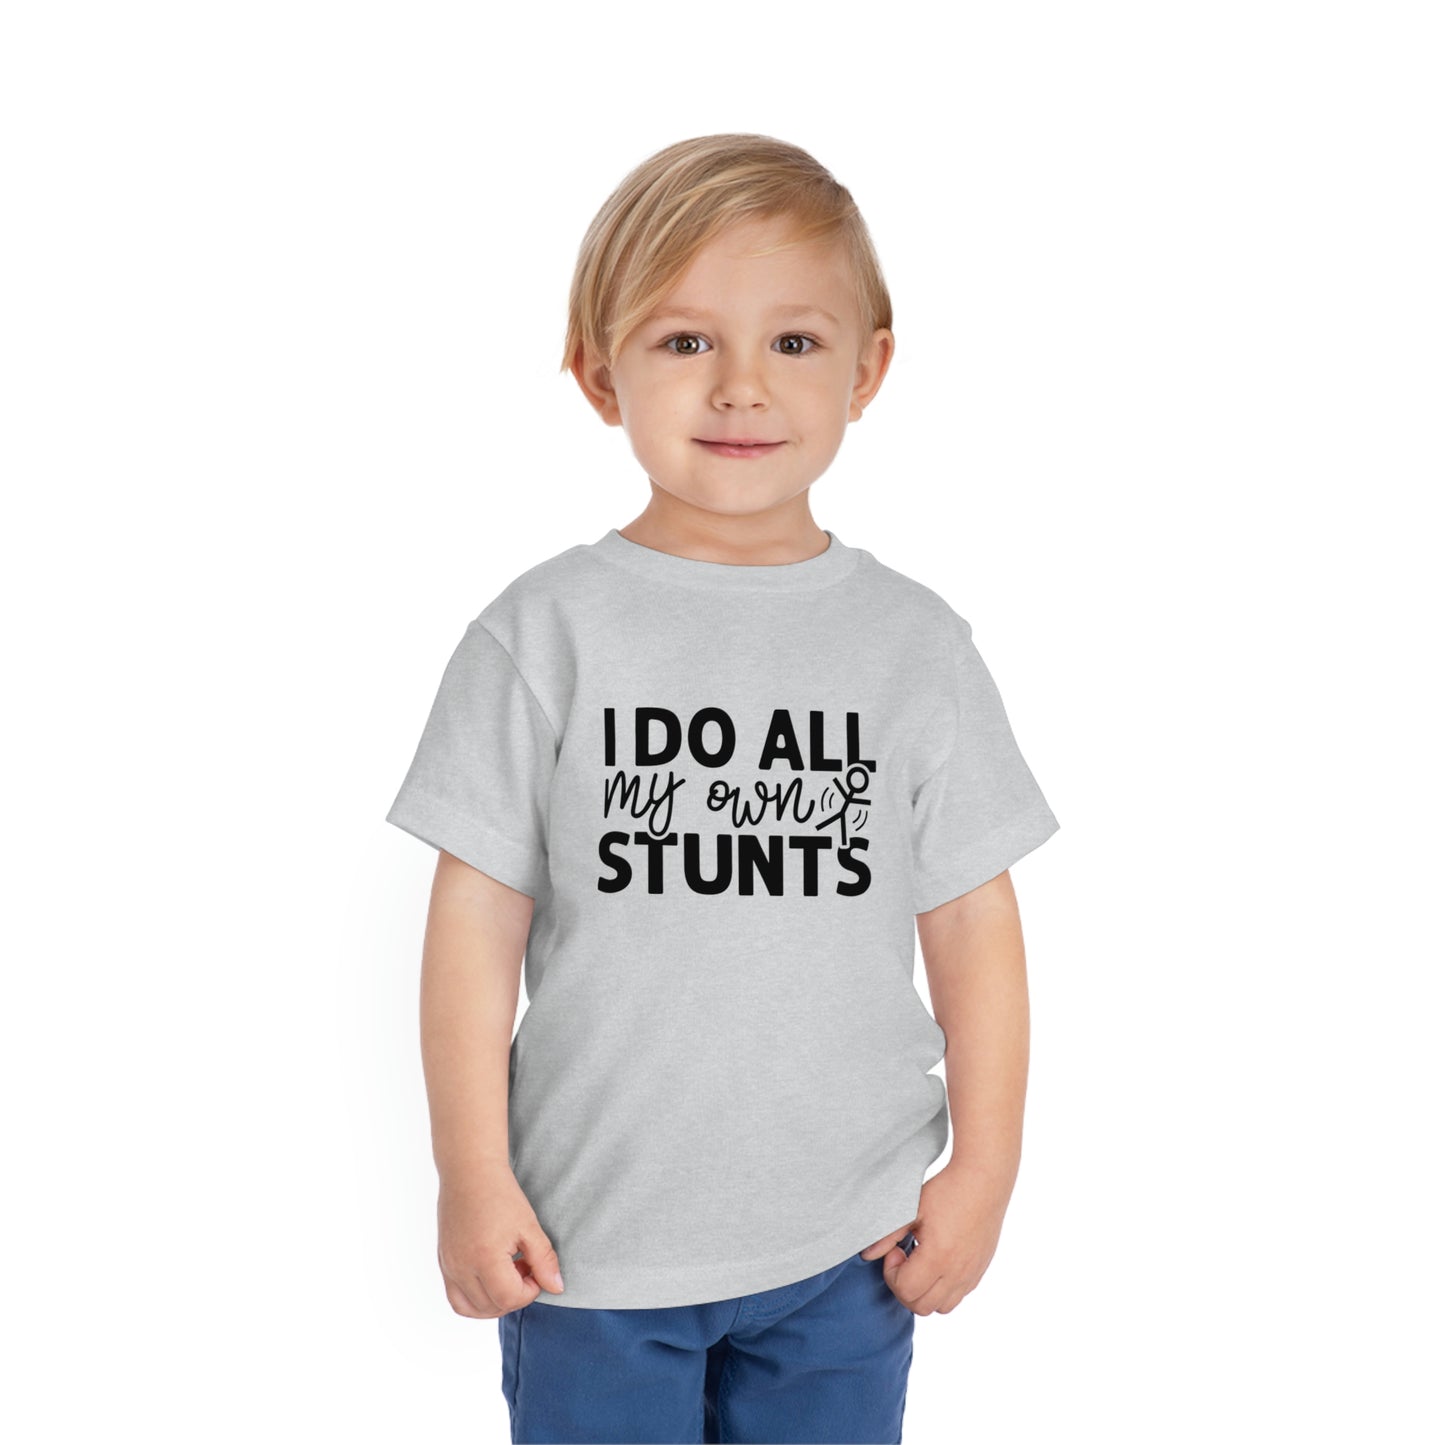 "I Do All My Own Stunts" Toddler Short Sleeve Tee (2T-5T)